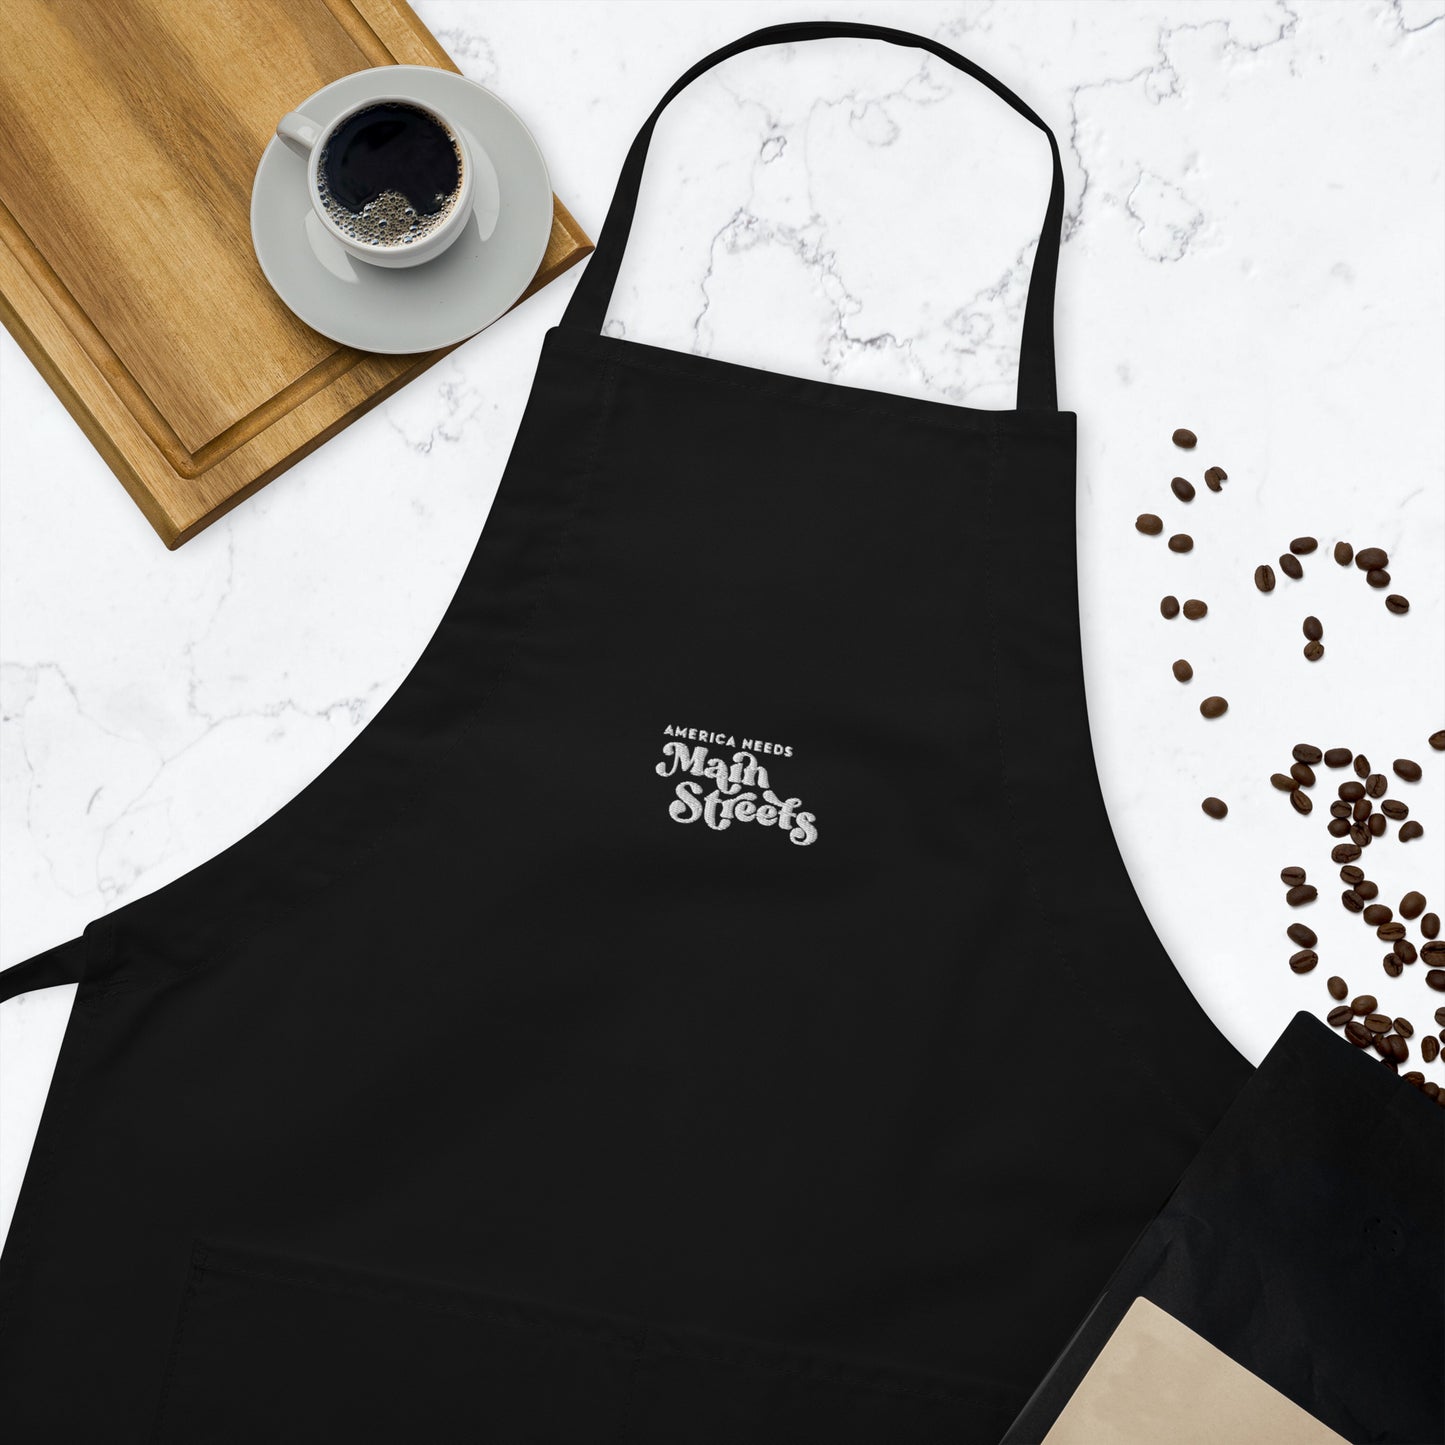 "America Needs Main Streets" Embroidered Apron